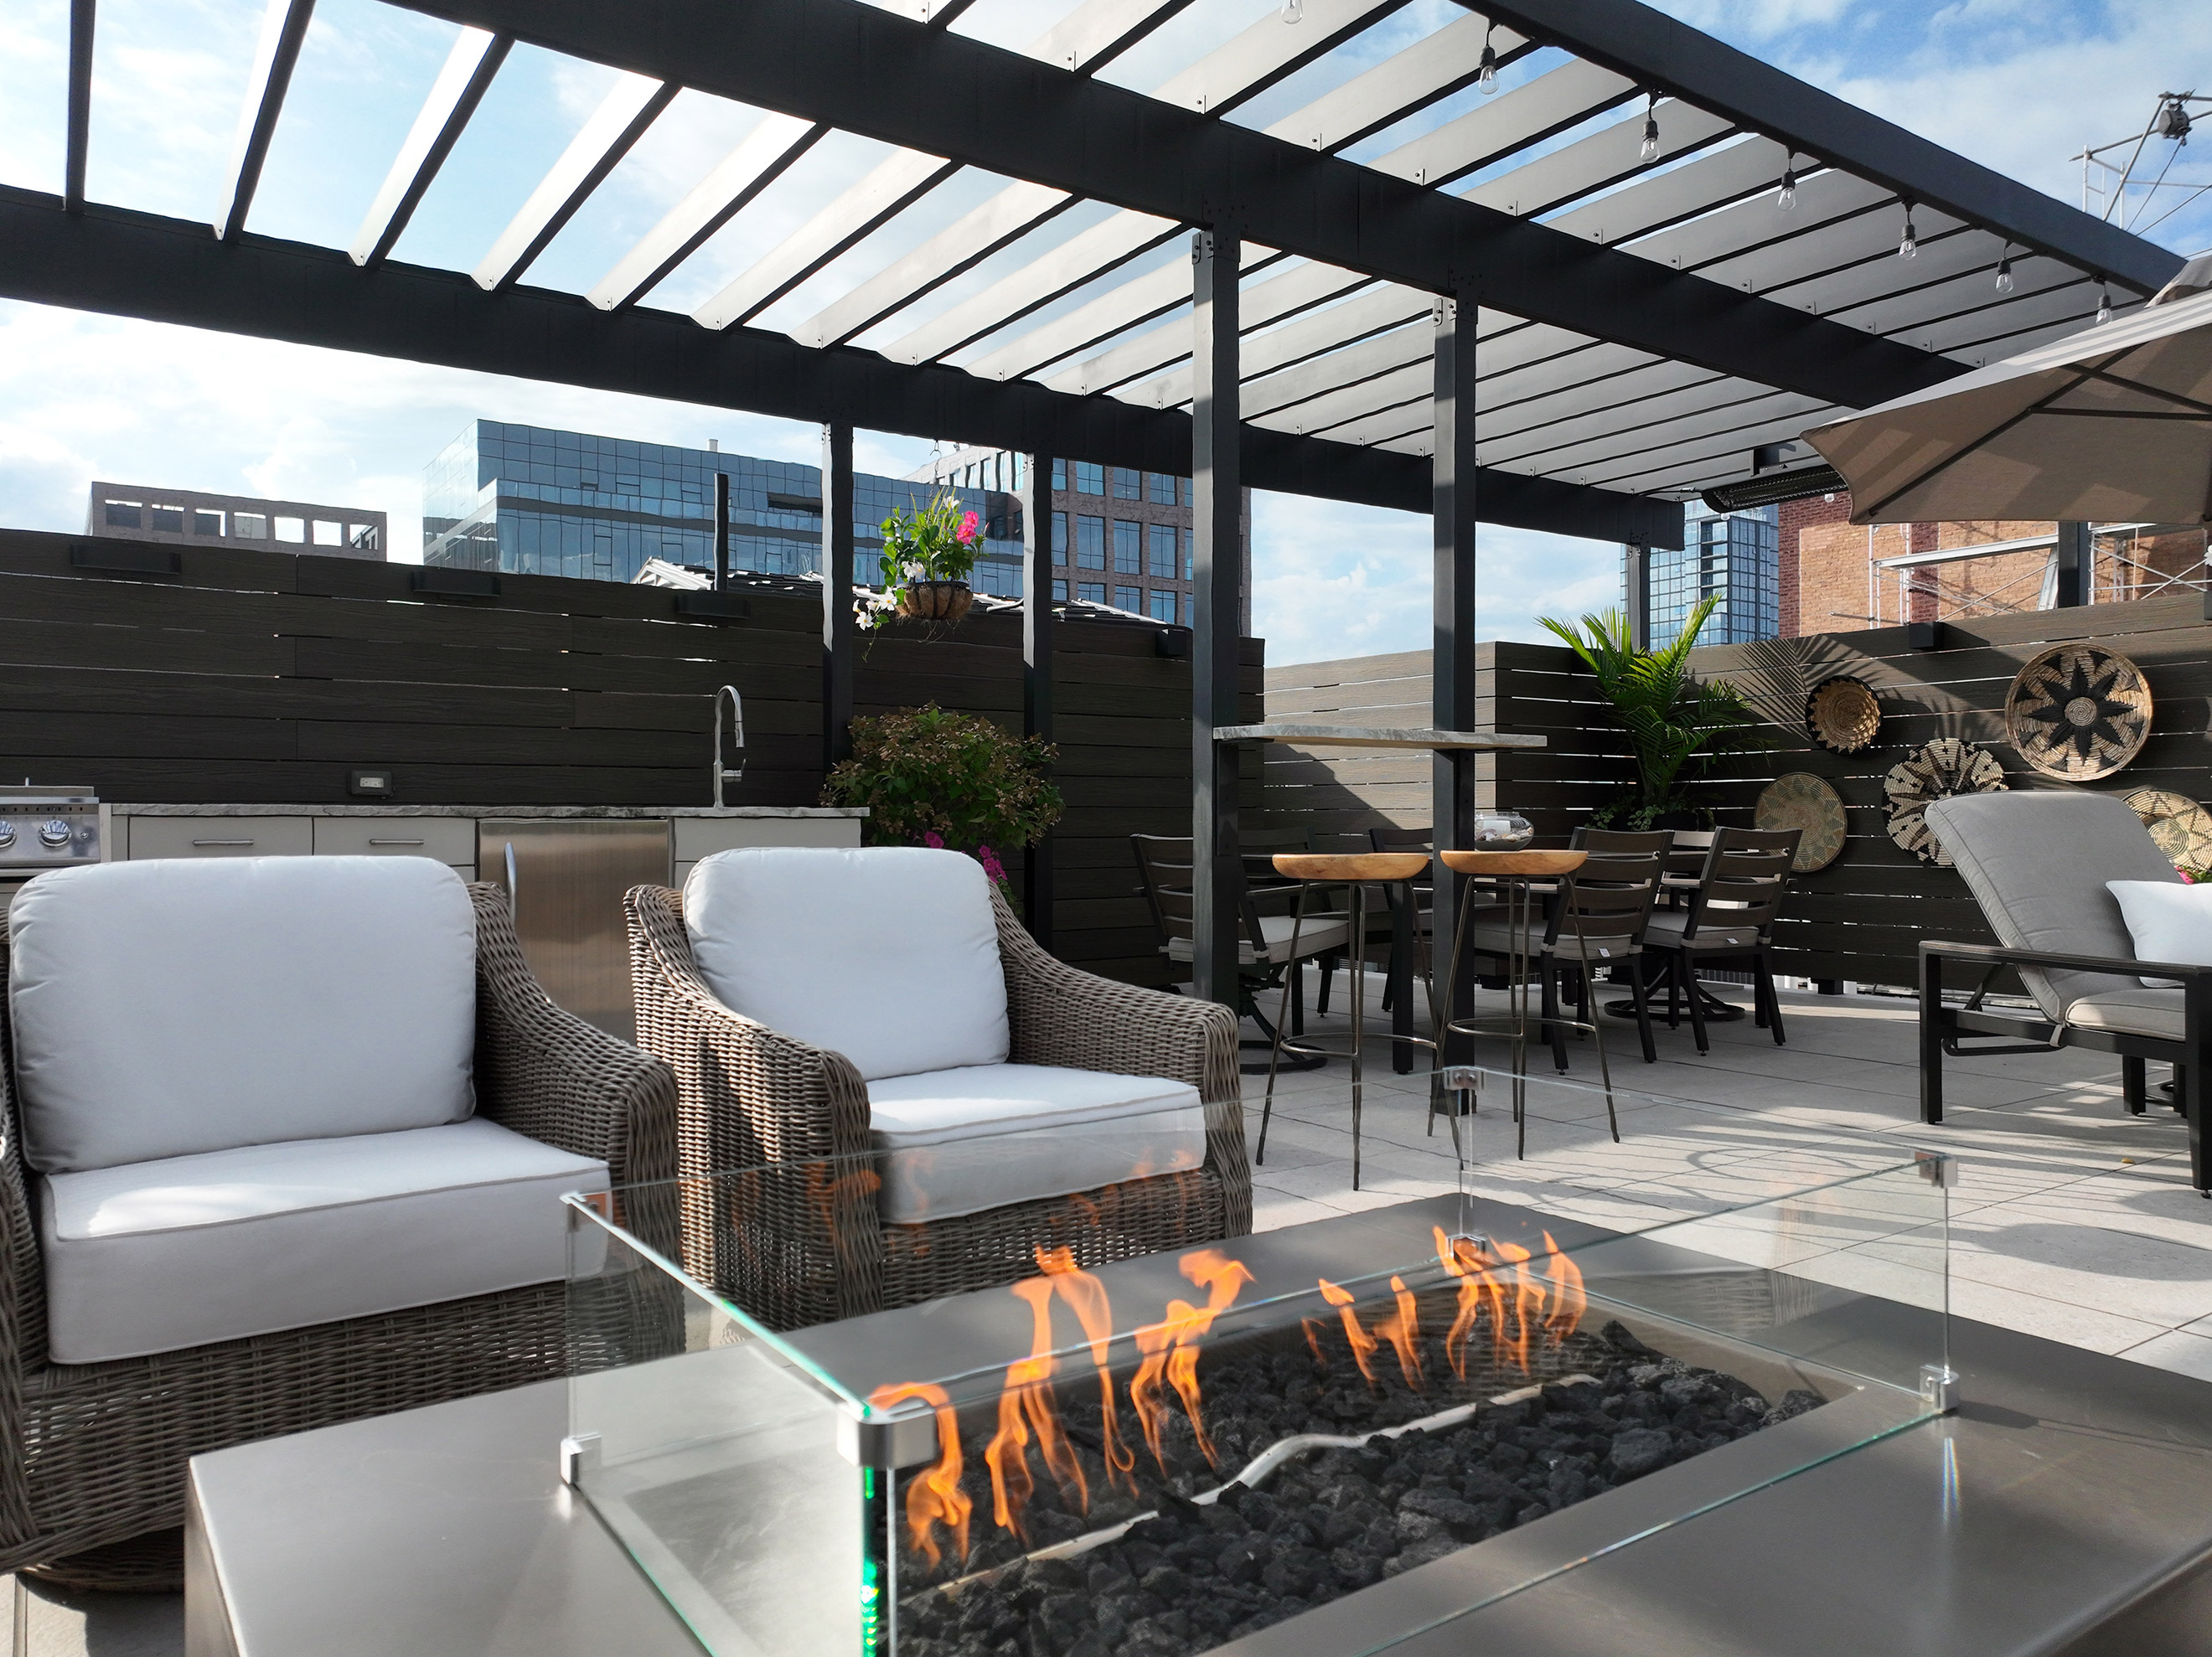 Outdoor steel pergola over a rooftop deck space with a fireplace and white chairs.